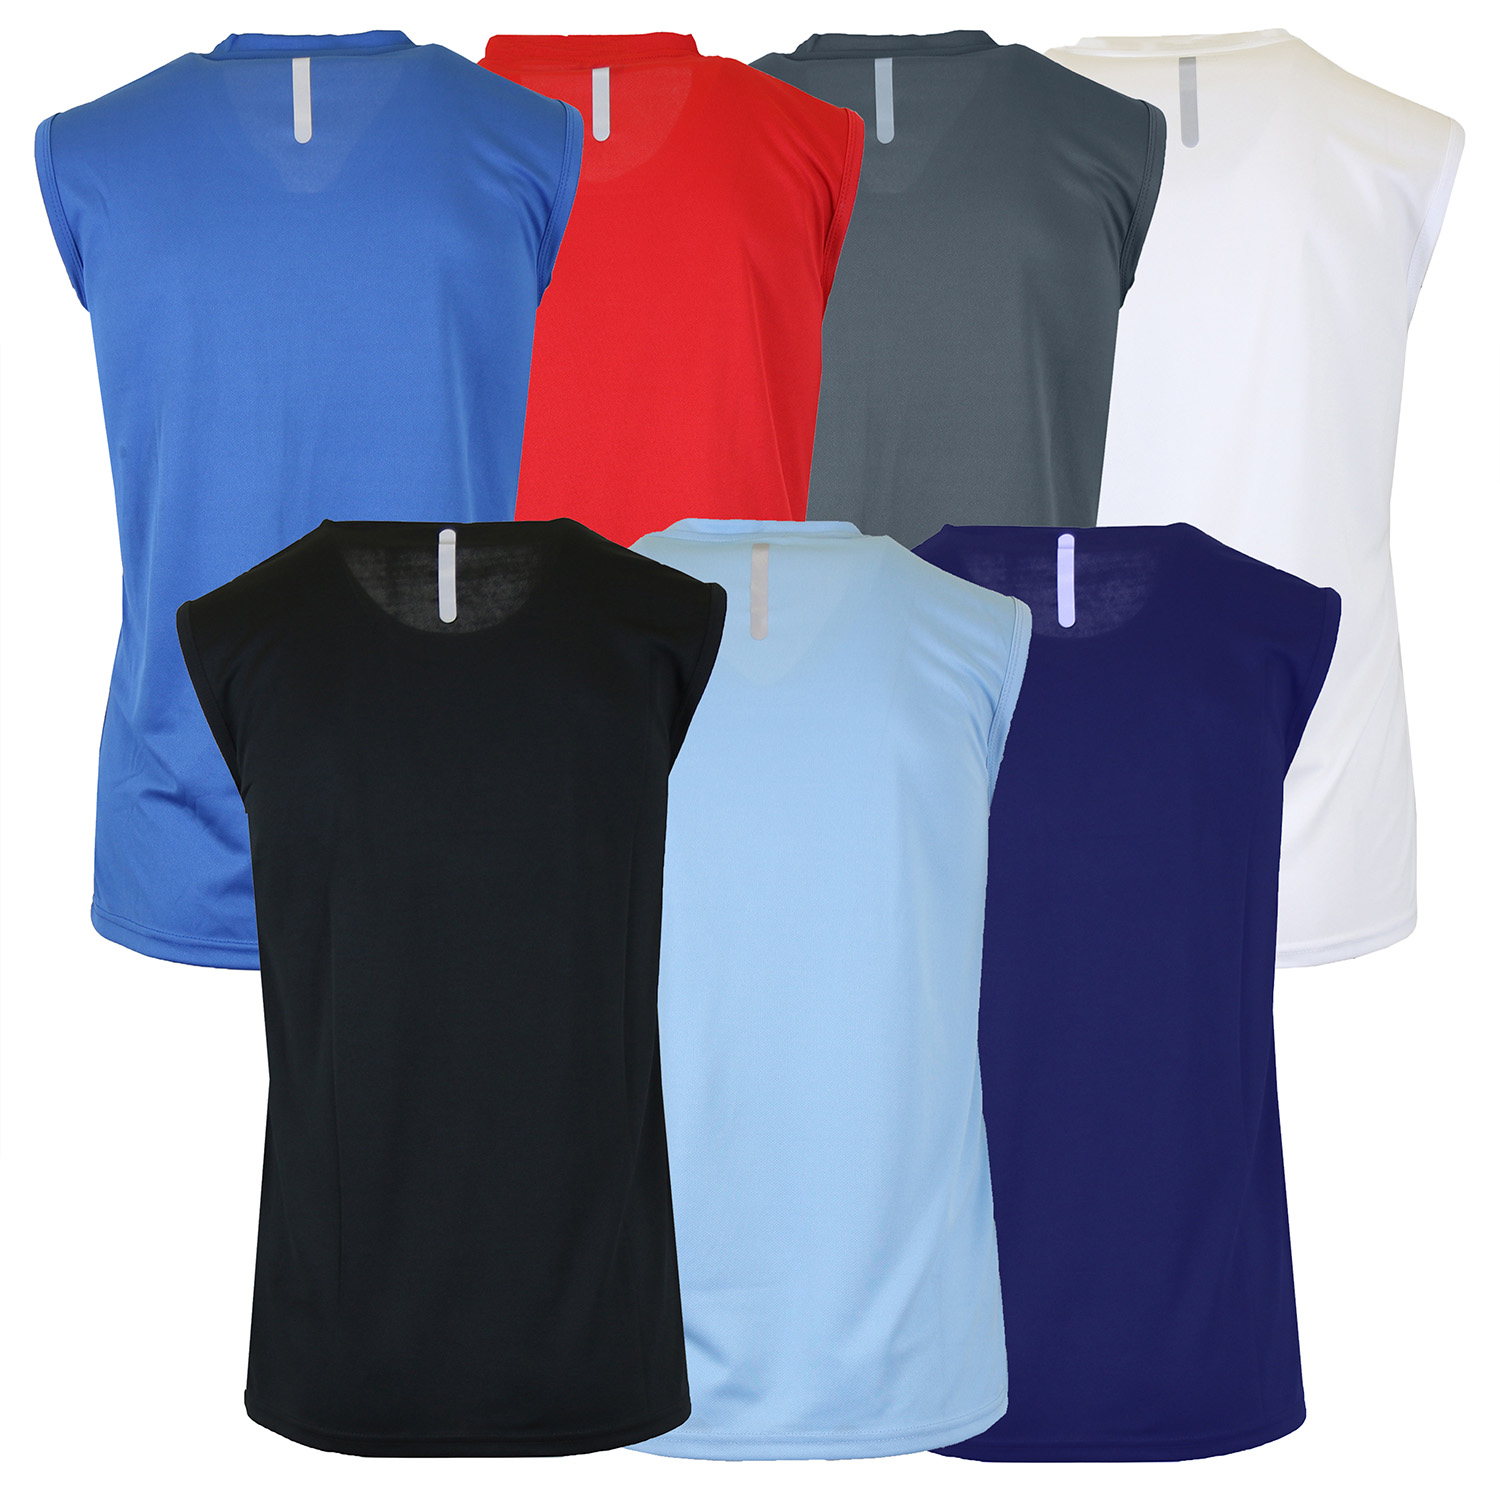 6 Pack Assorted Men's Moisture Wicking Wrinkle Free Performance Muscle Tee